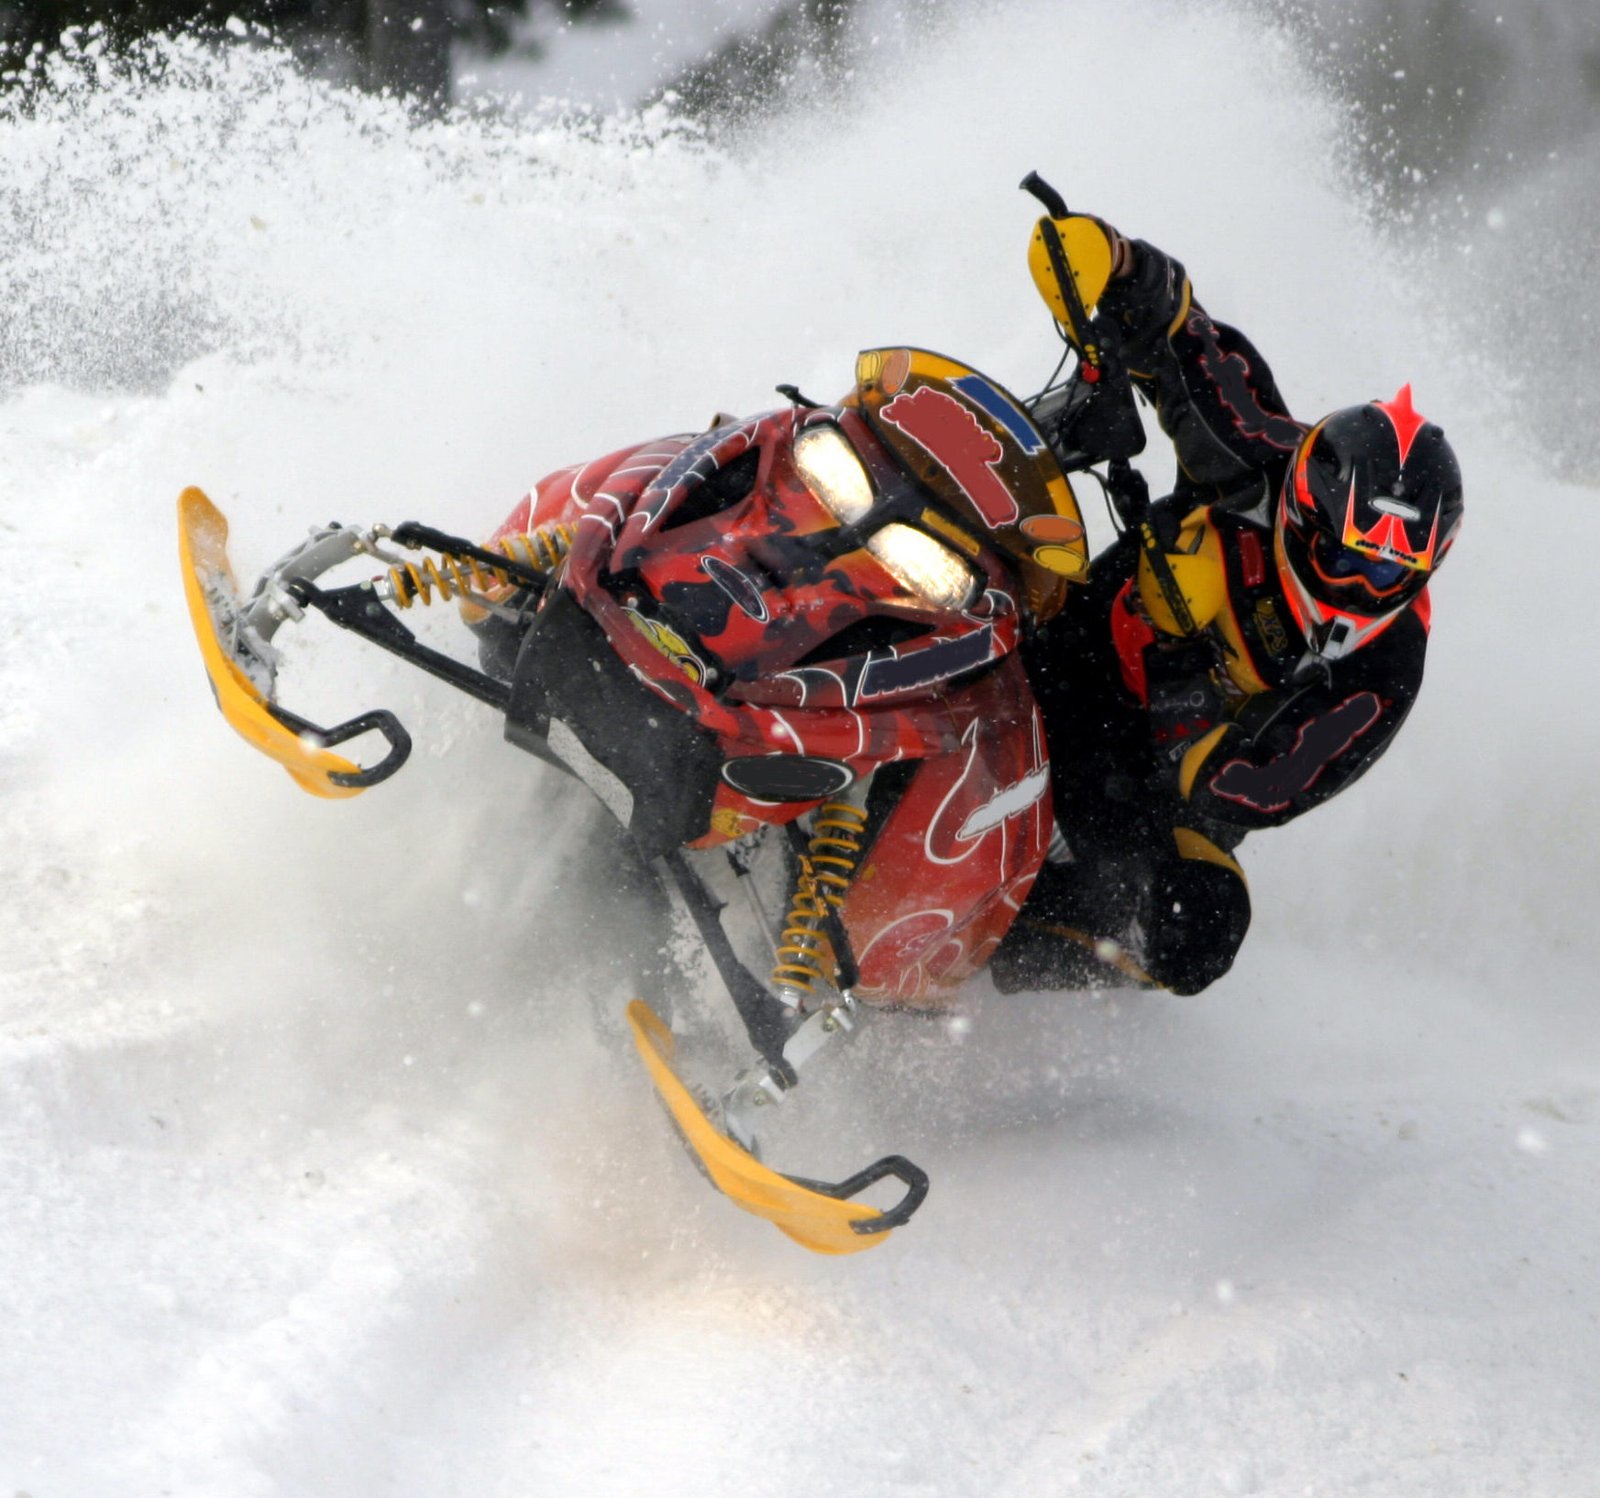 red and yellow Snowmobile Wraps riding in deep snow on one side.